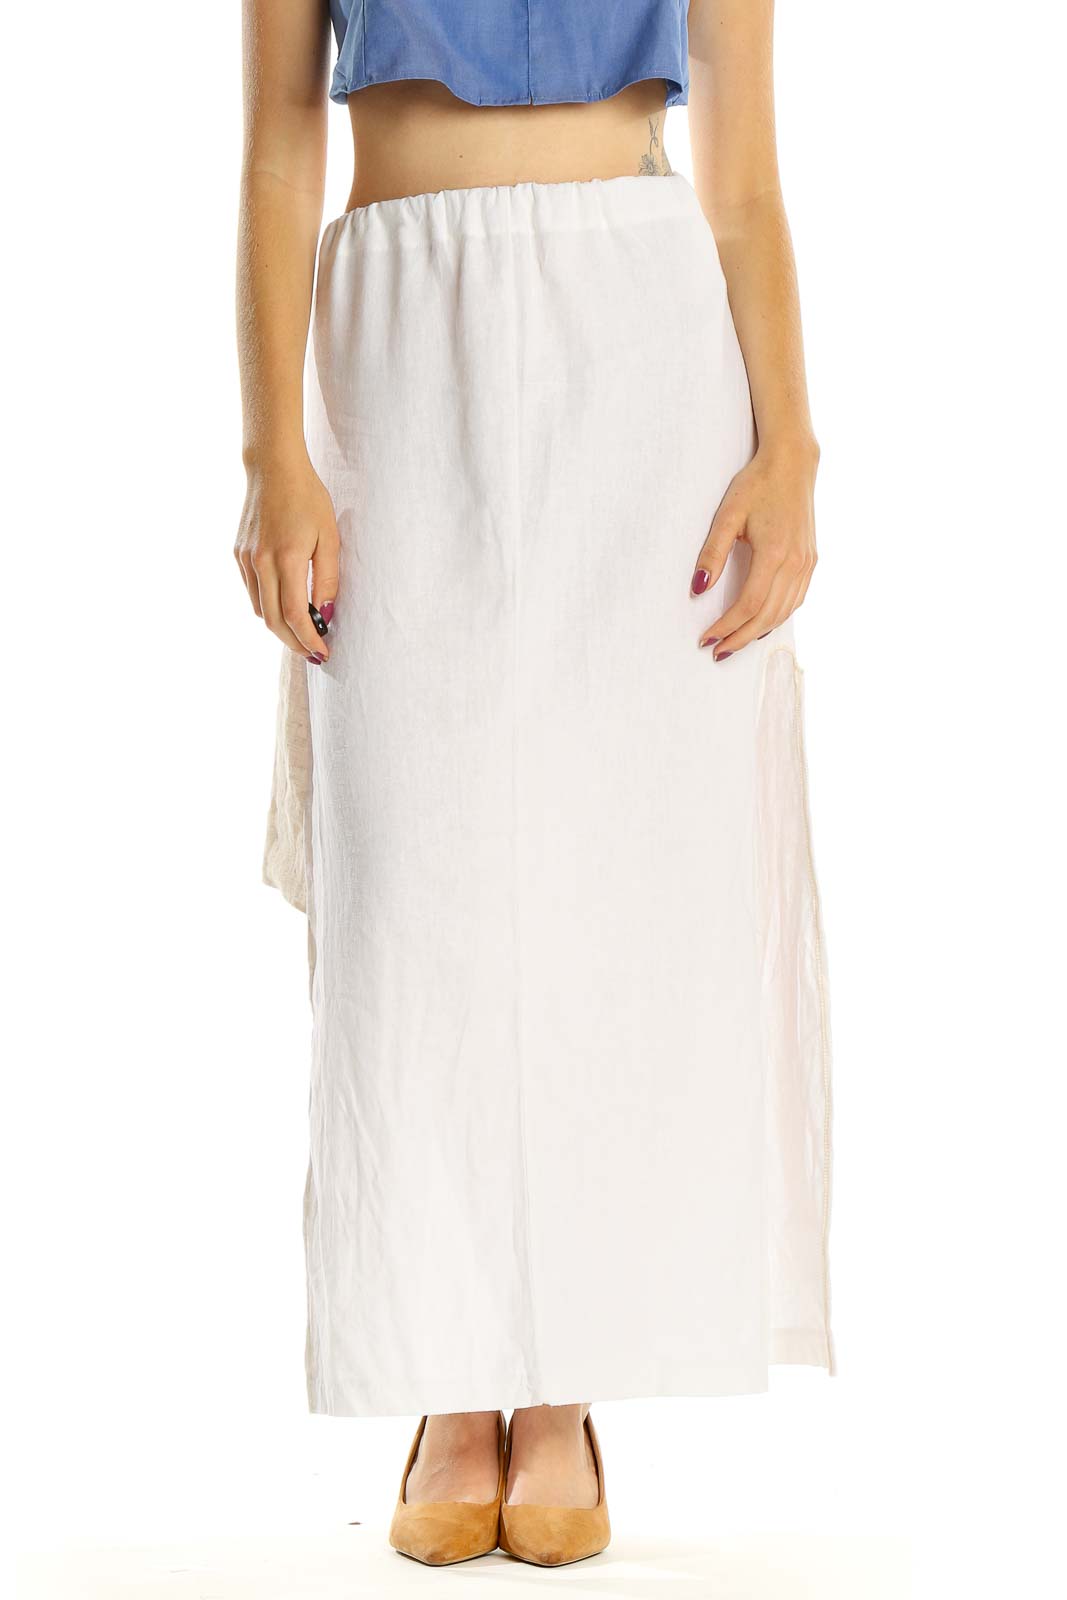 Reworked: Cannes Skirt - 100% Linen skirt or beach cover up made from linen pants Front